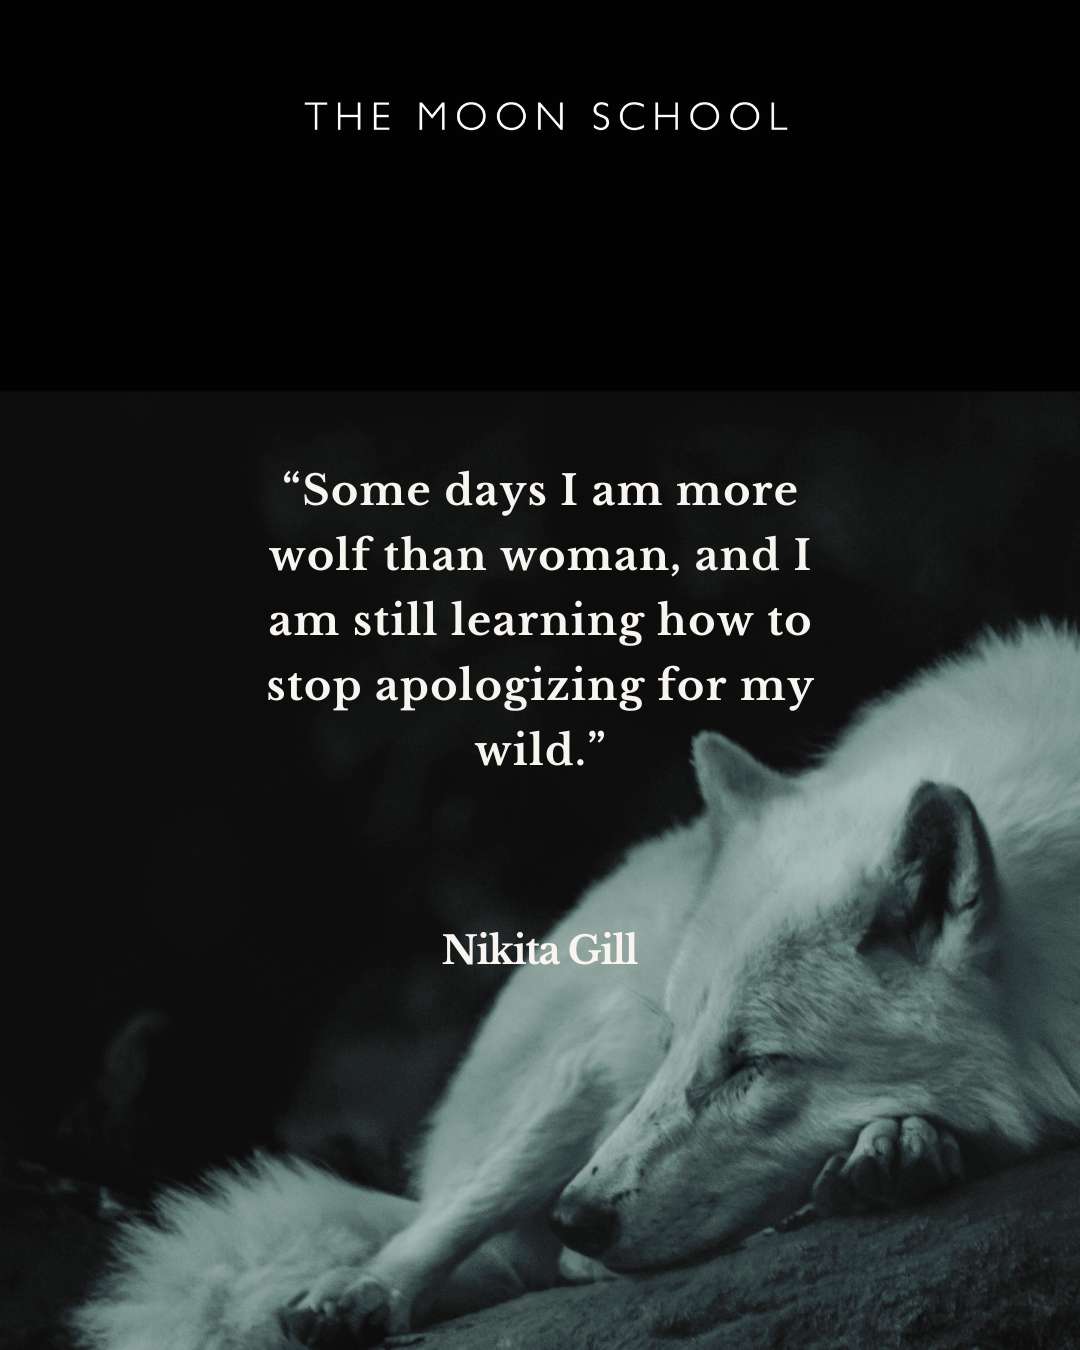 Some days I am more wolf than woman Nikita Gill Quote Artemis Goddess of the hunt